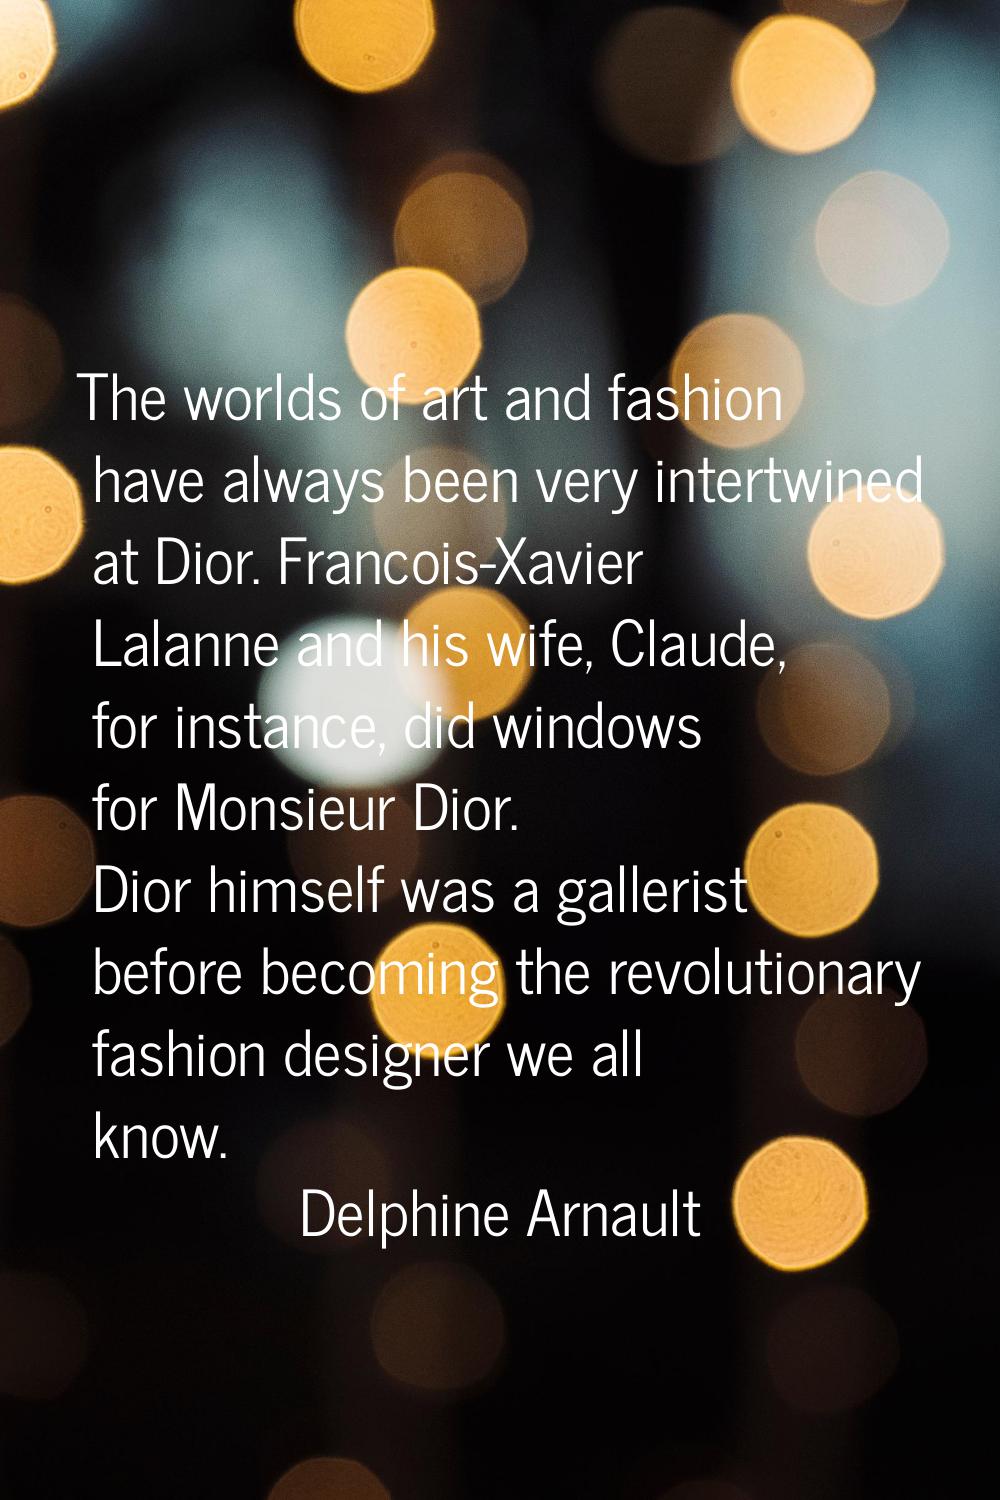 The worlds of art and fashion have always been very intertwined at Dior. Francois-Xavier Lalanne an